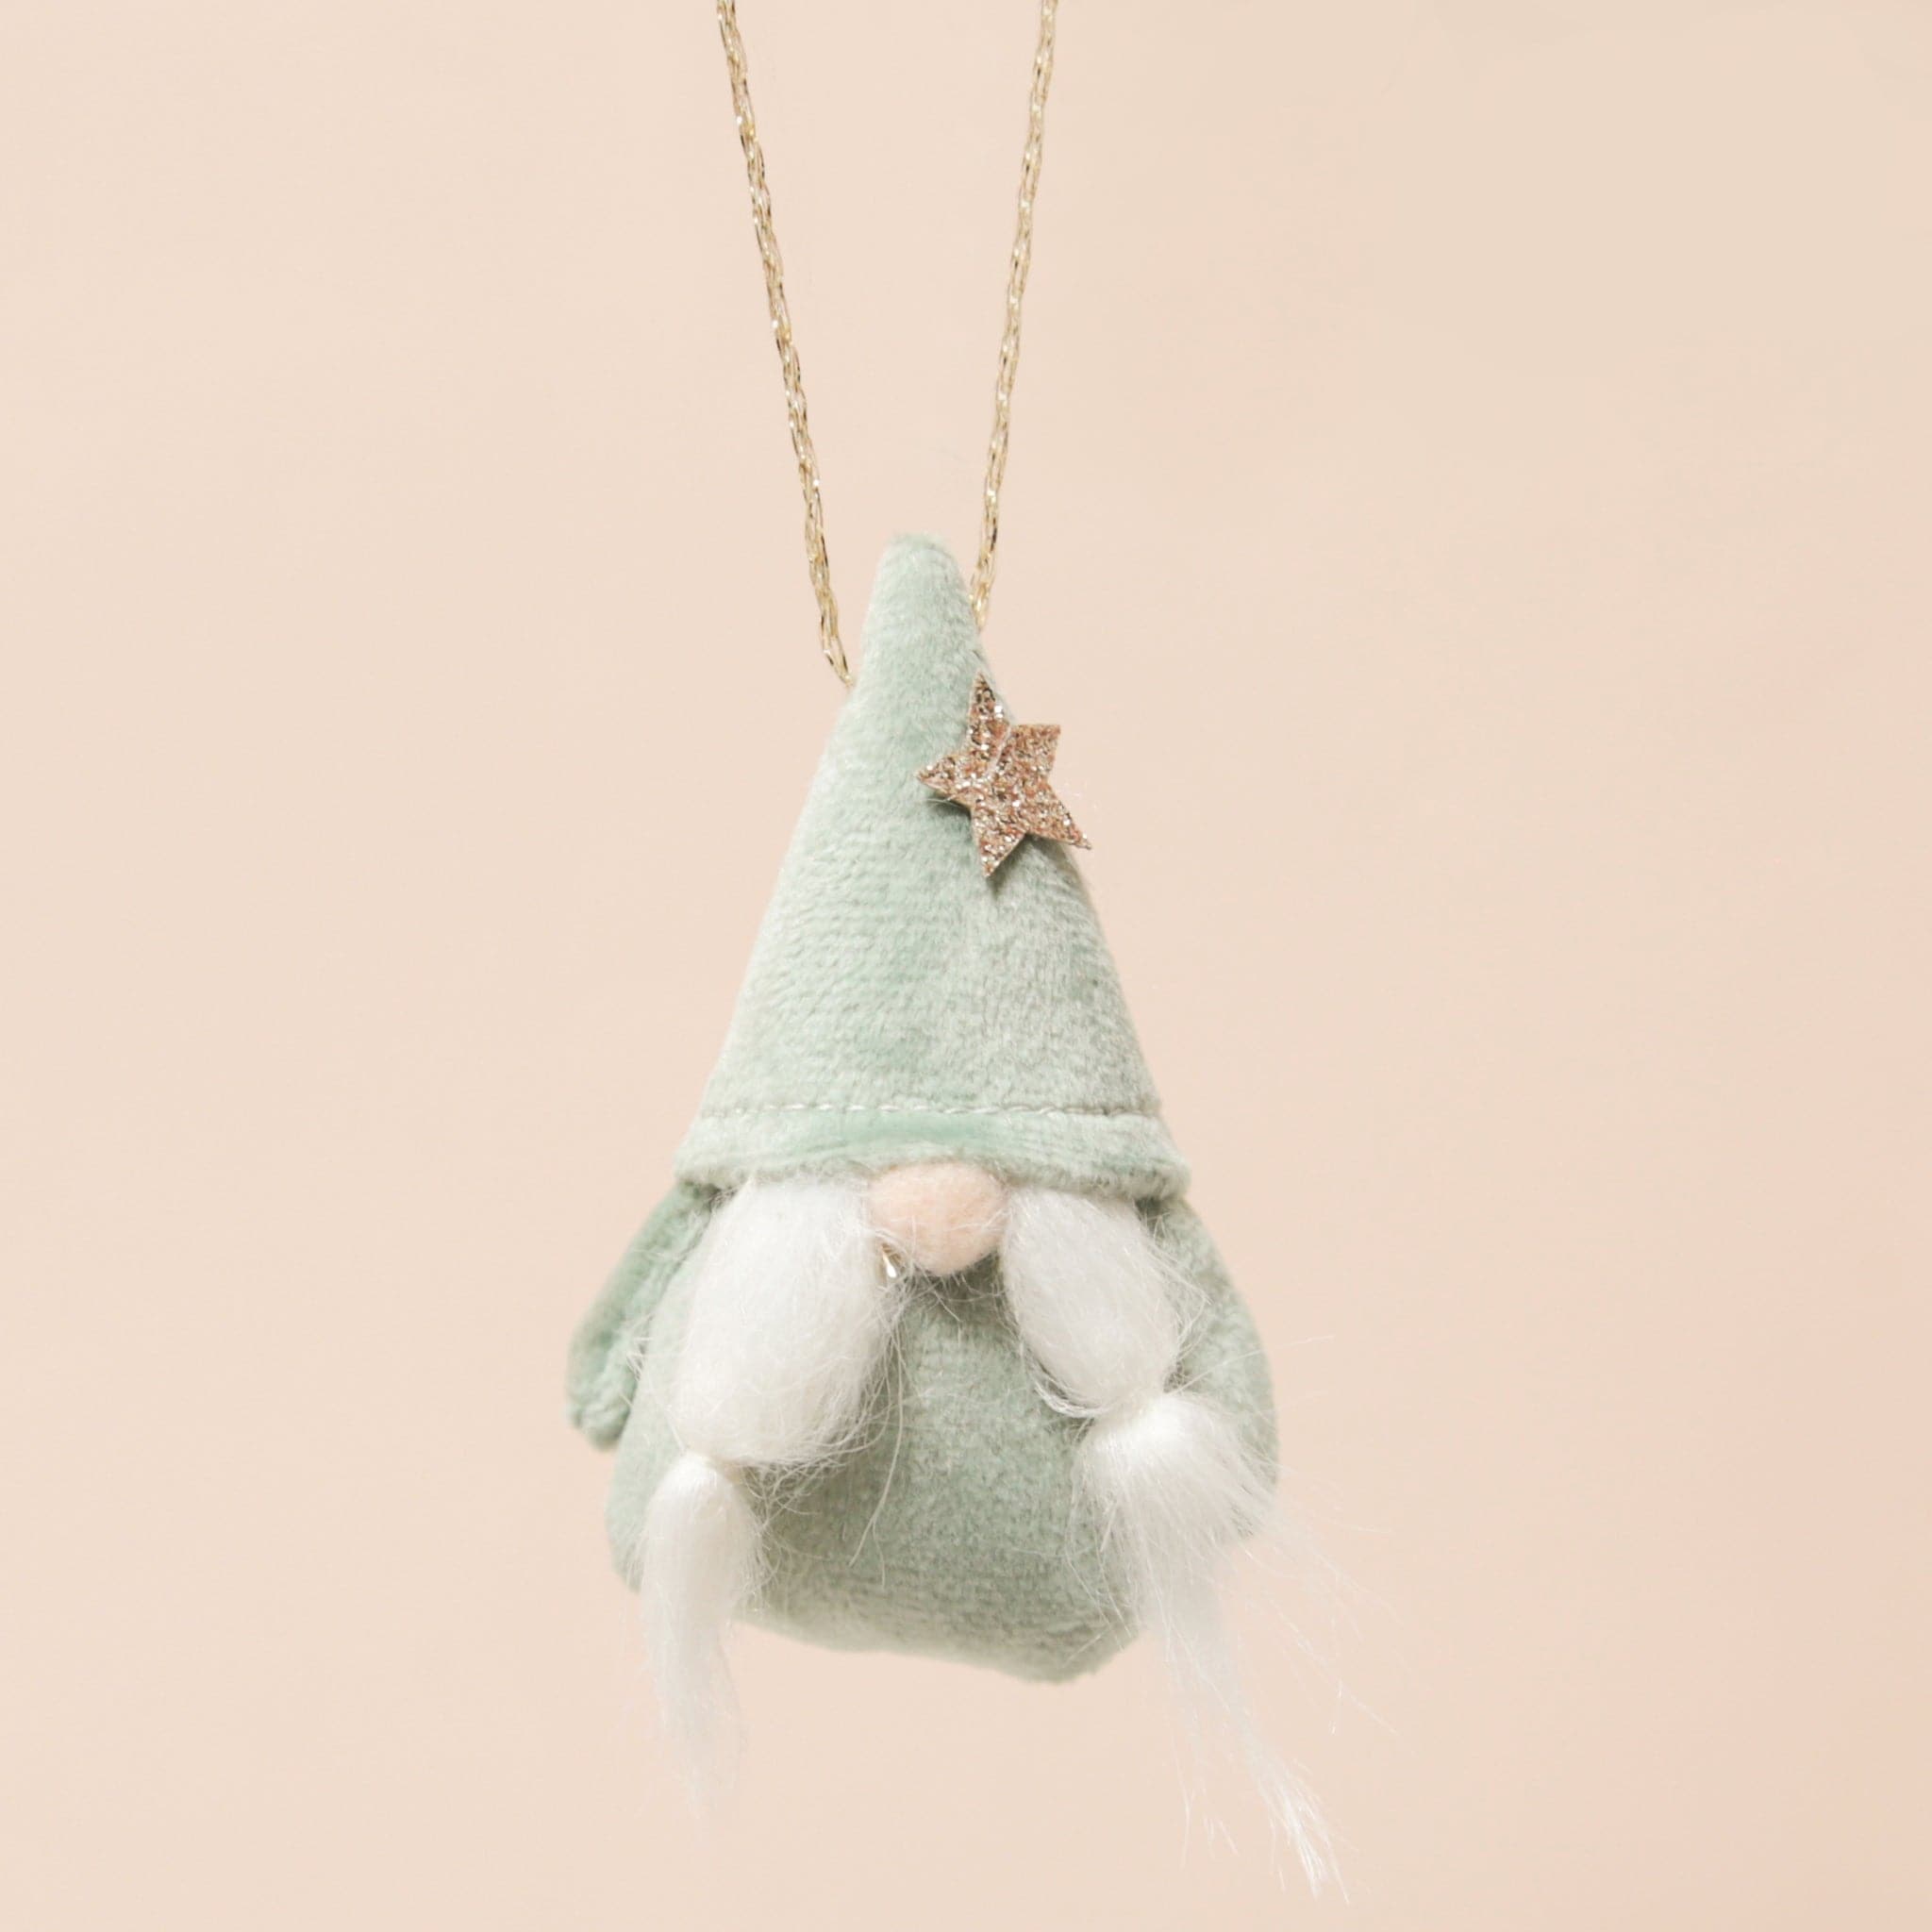 plush mint gnome ornament with a gold star and braided beard on a neutral ground